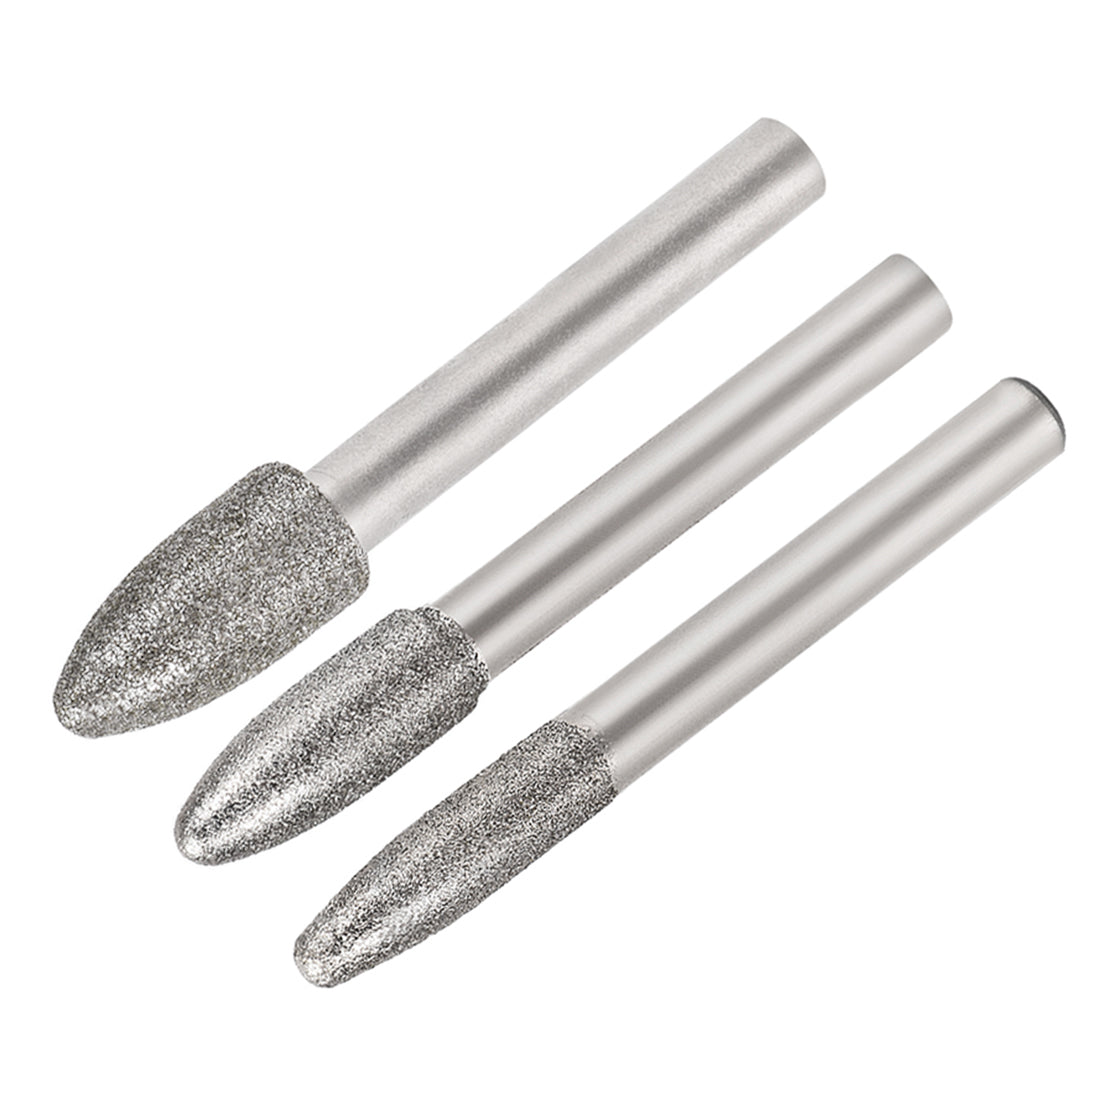 Uxcell Uxcell Diamond Burrs Grinding Drill Bits for Carving Rotary Tool 1/4-Inch Shank 8mm Tapered 150 Grit 2 Pcs